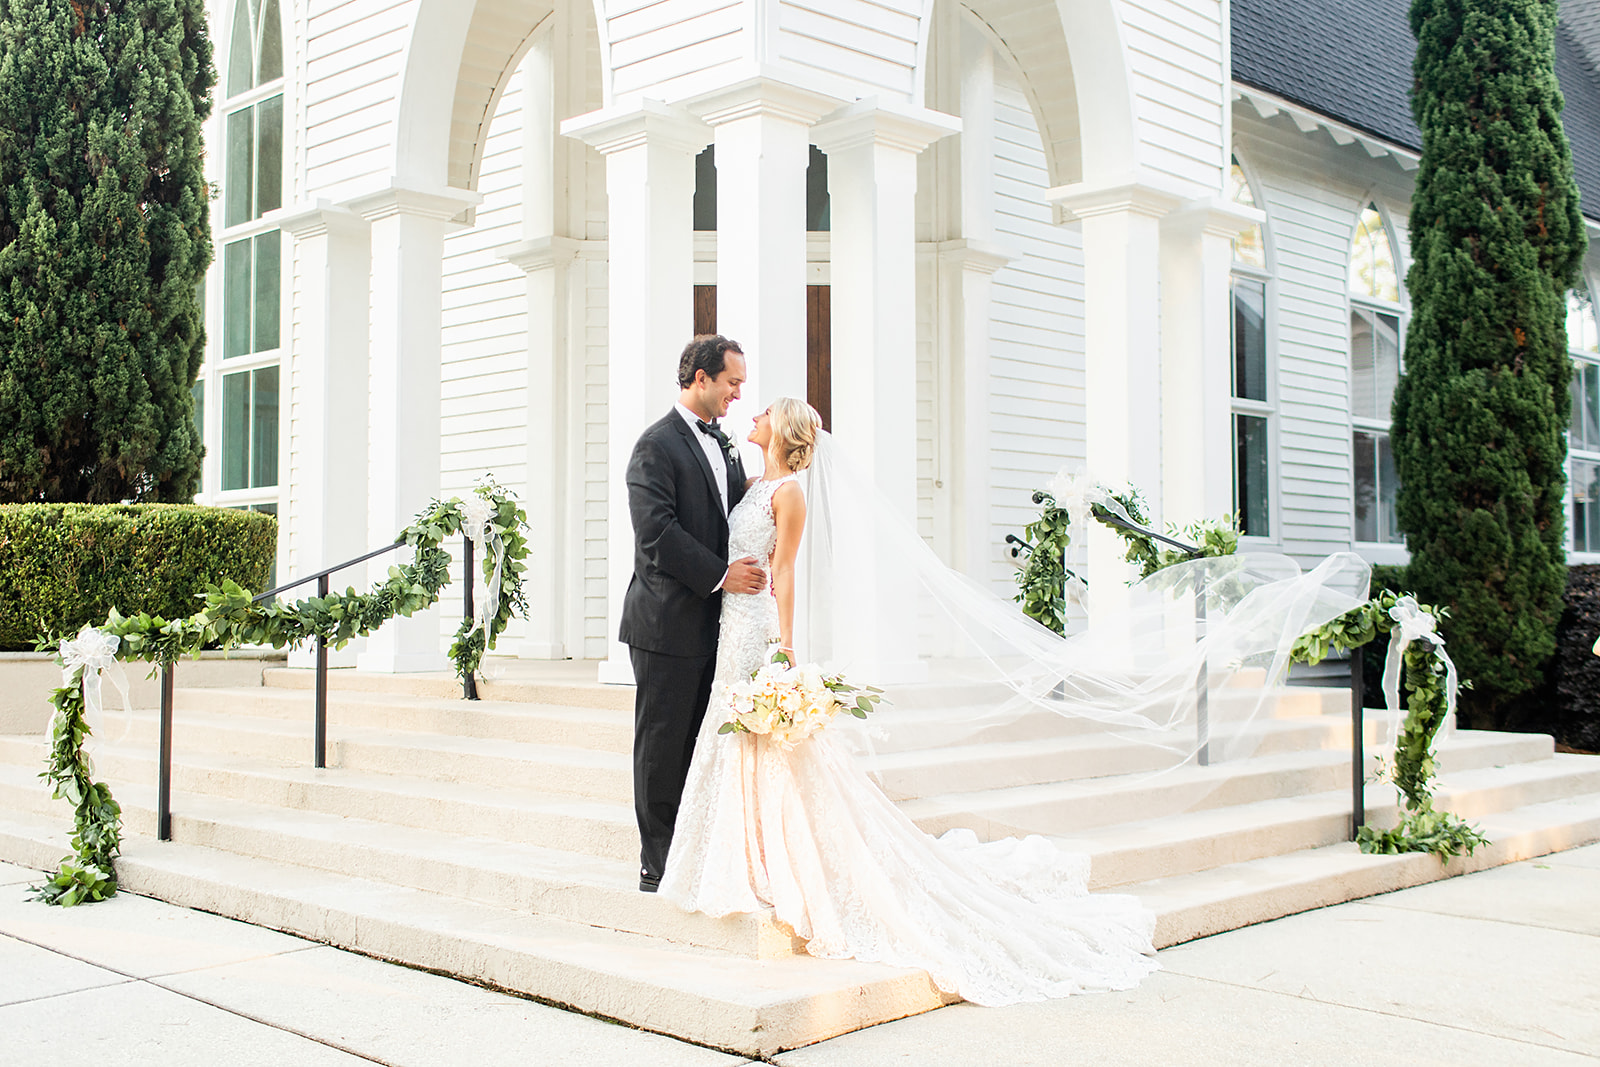 Blush-Black-Tie-Wedding-at-the-Grand-Hotel-in-Point-Clear-Alabama-Anna-Filly-Photography-Cross-Wedding-Bride_+_Groom-21.jpg